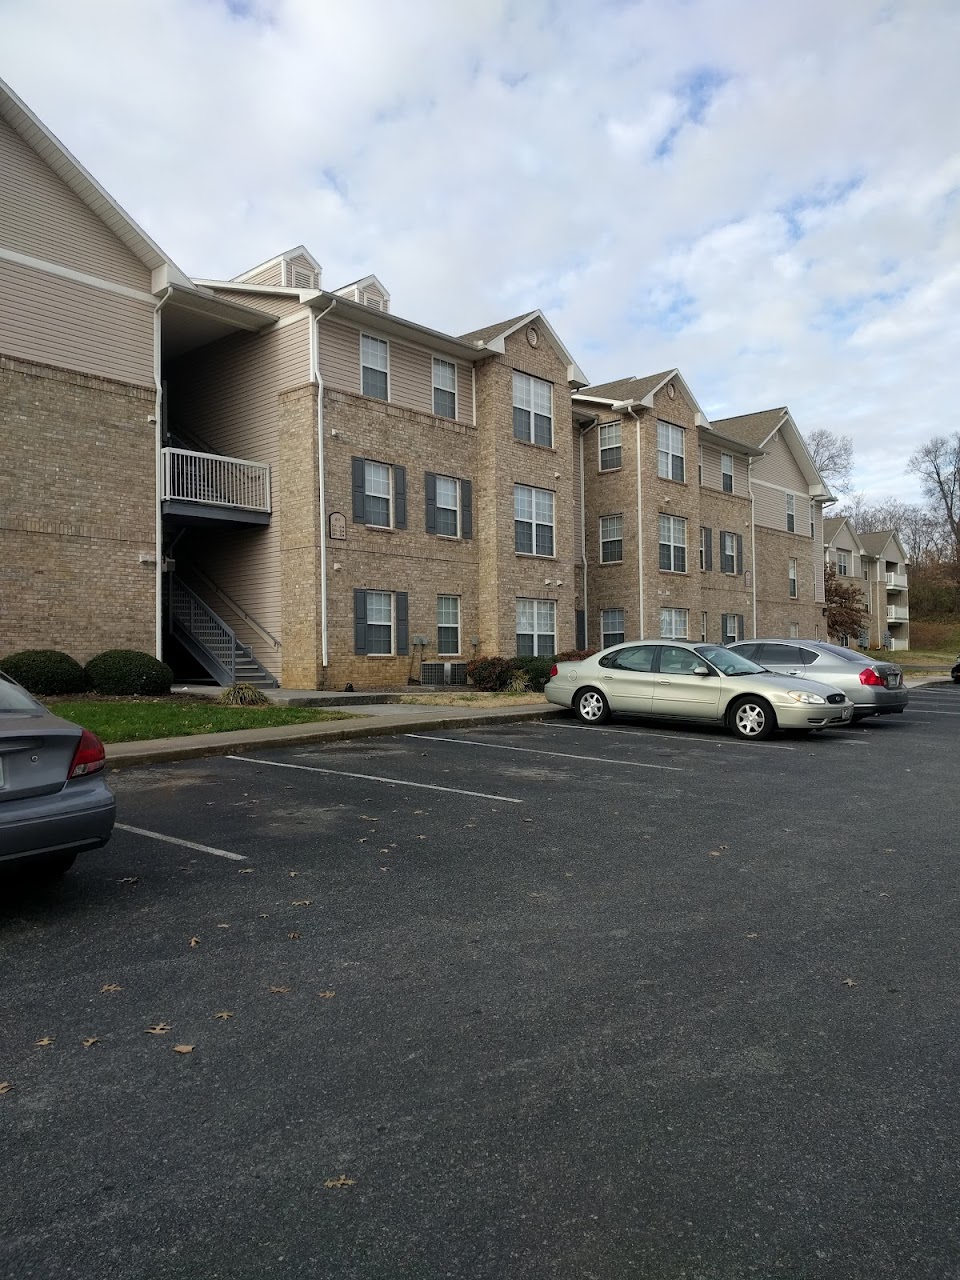 Photo of SUTHERLAND PARK APTS. Affordable housing located at 120 SUTHERLAND AVE KNOXVILLE, TN 